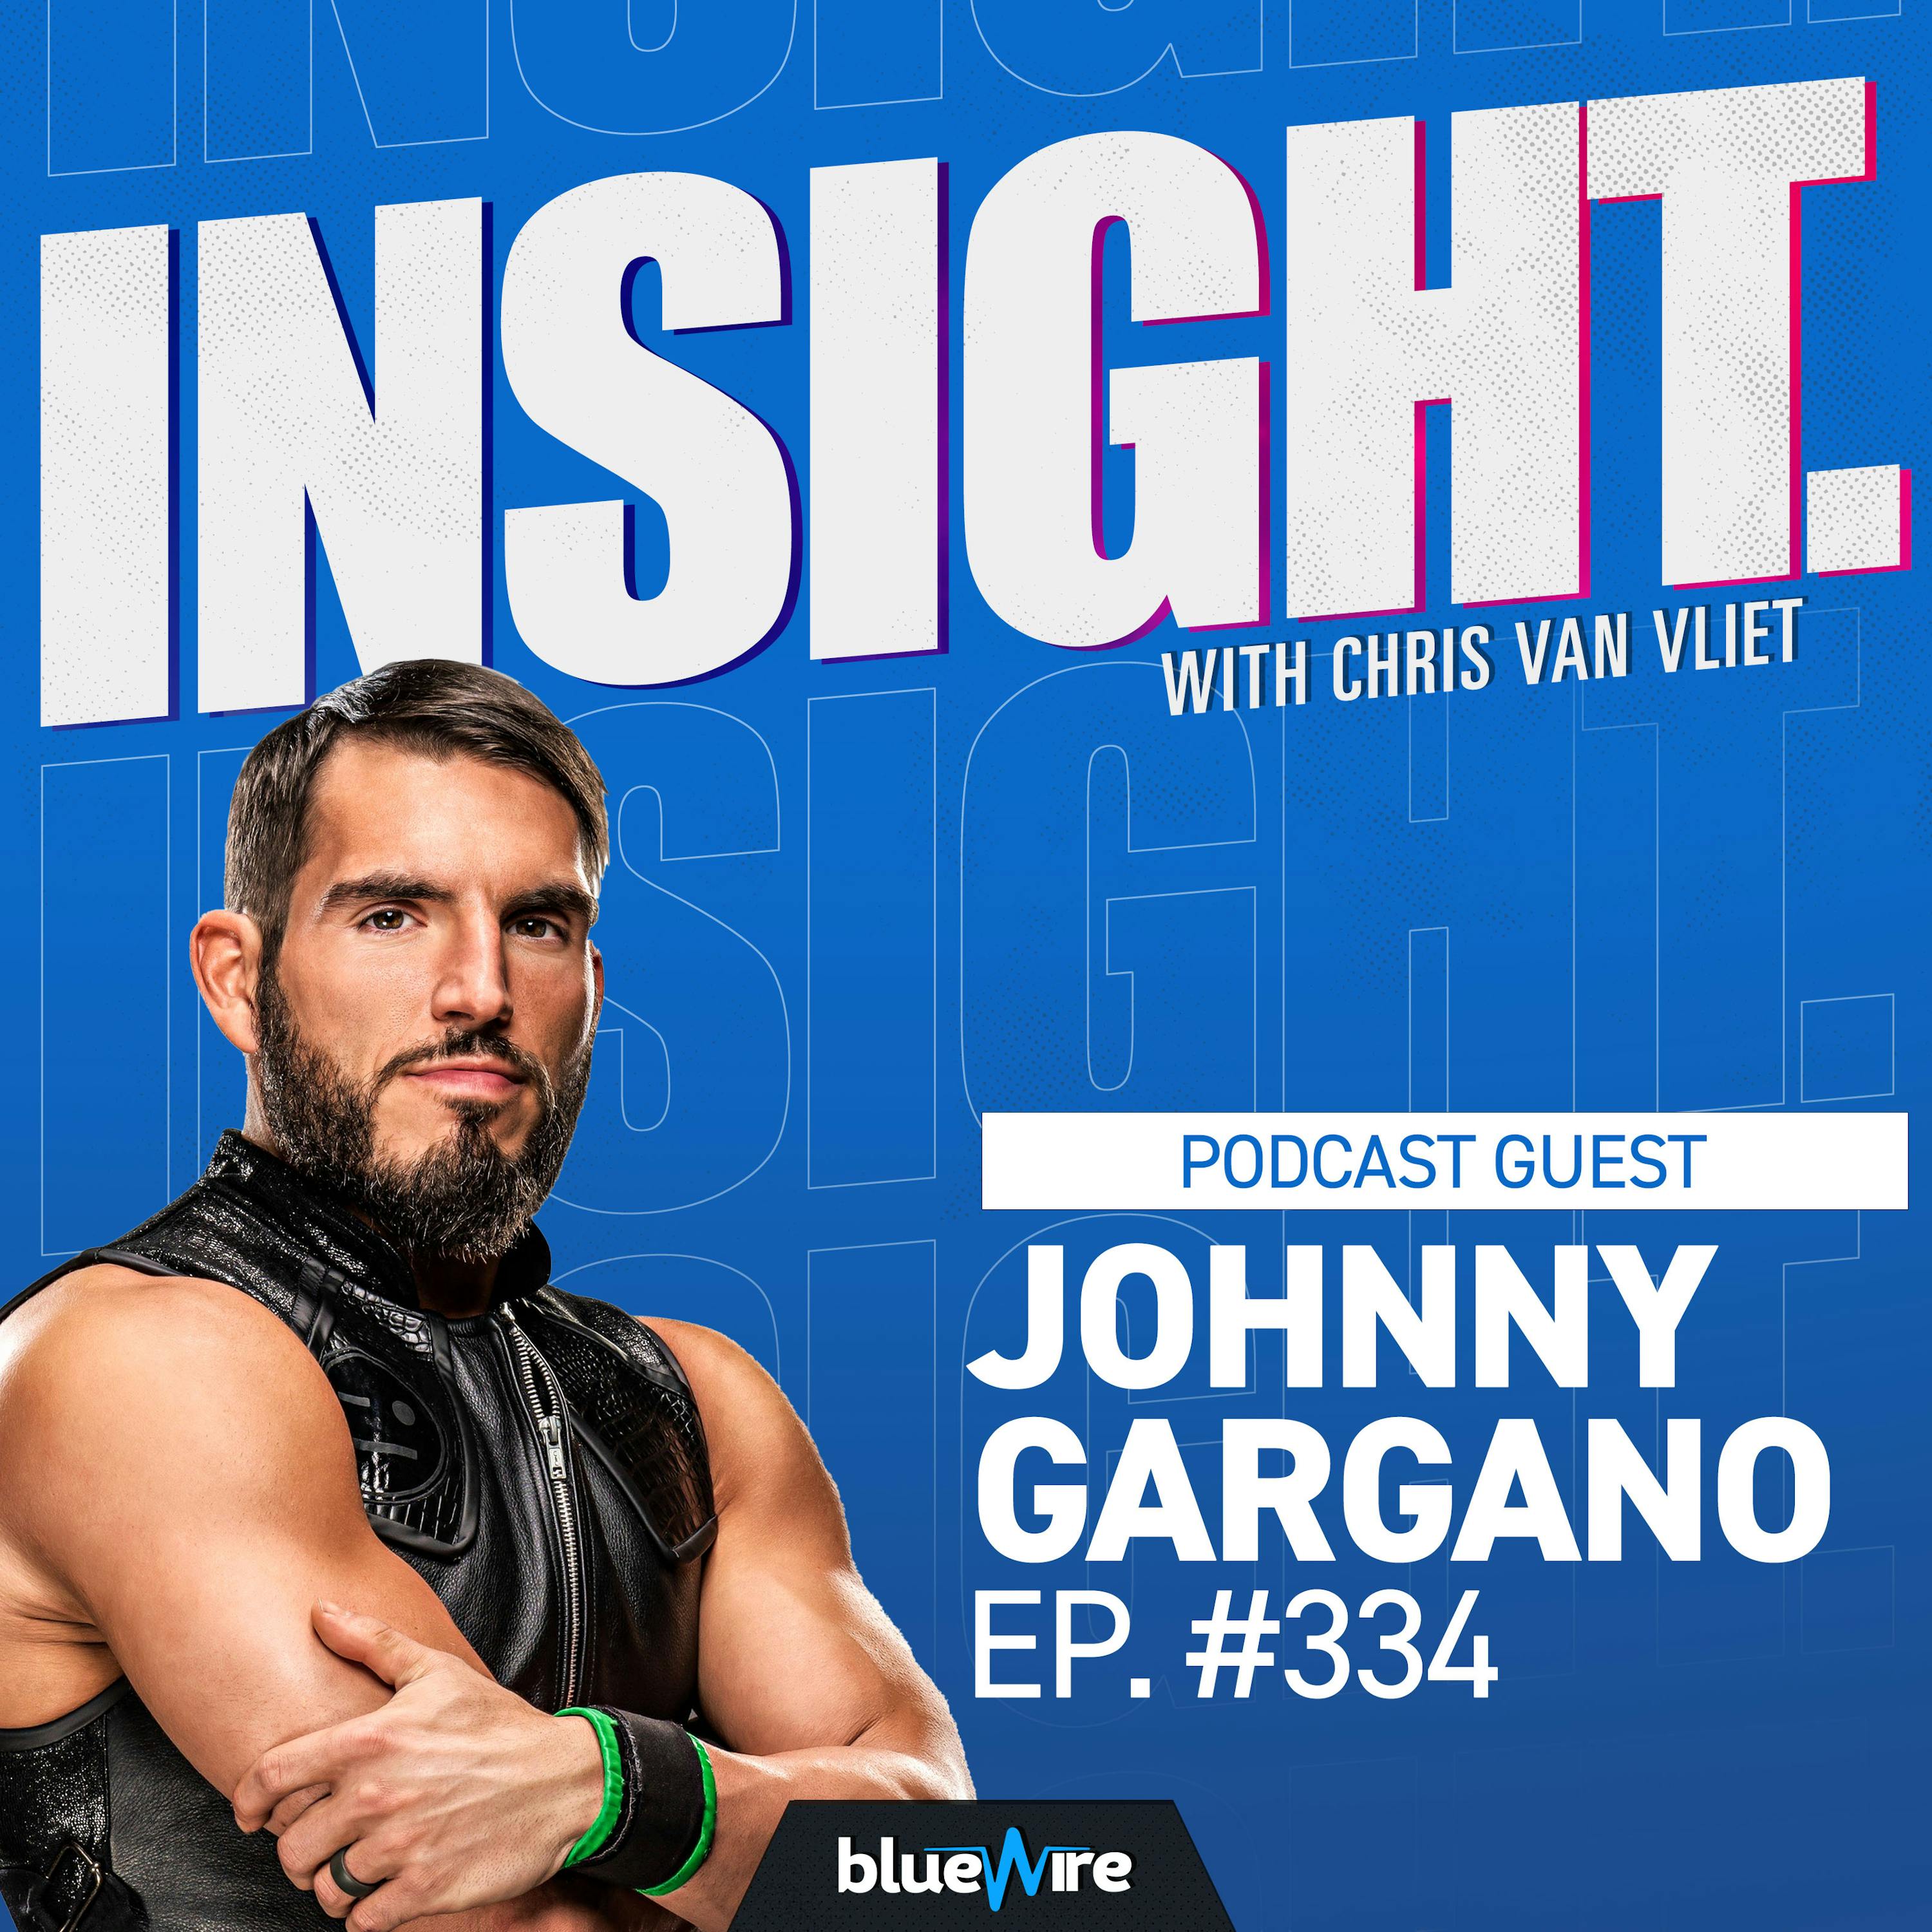 Why Did Johnny Gargano Leave WWE And What's Next For Him?